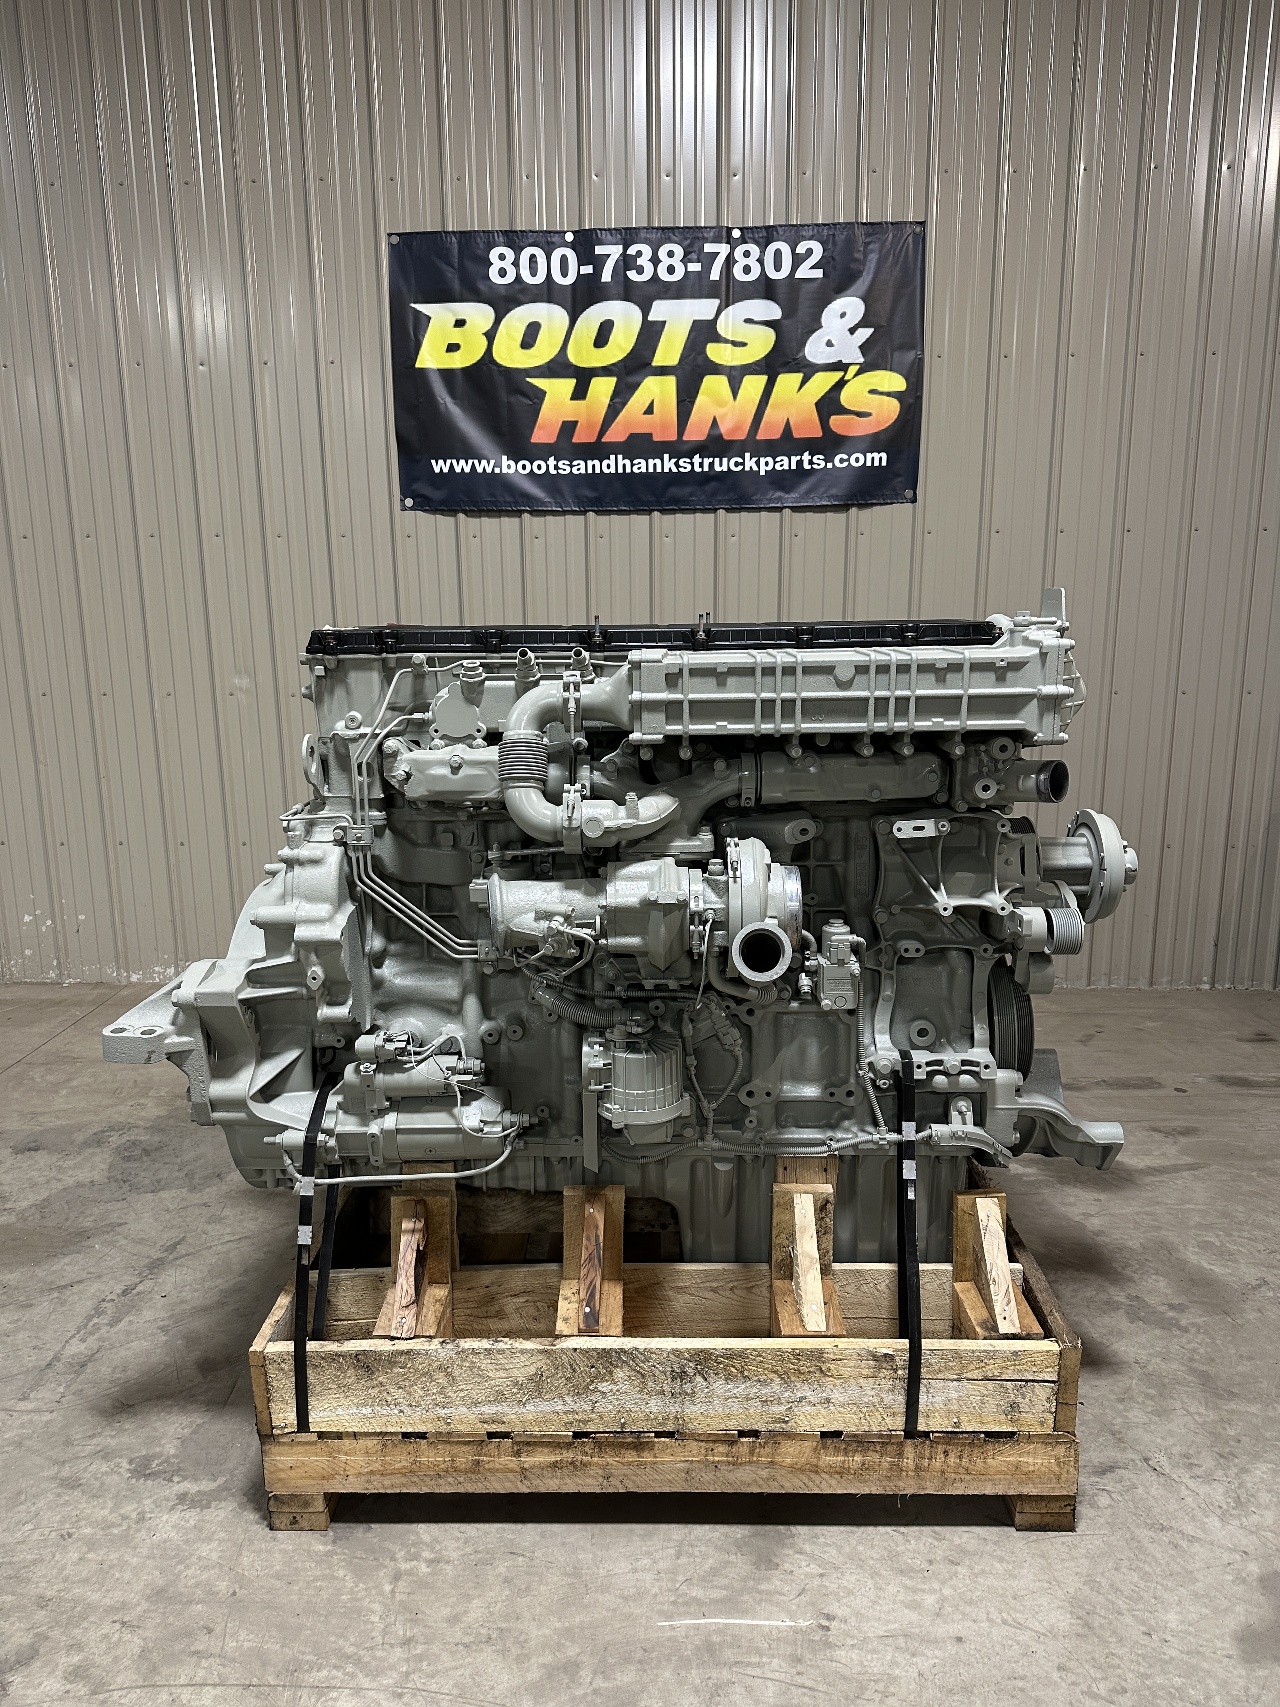 USED 2014 DETROIT DD13 COMPLETE ENGINE TRUCK PARTS #1996